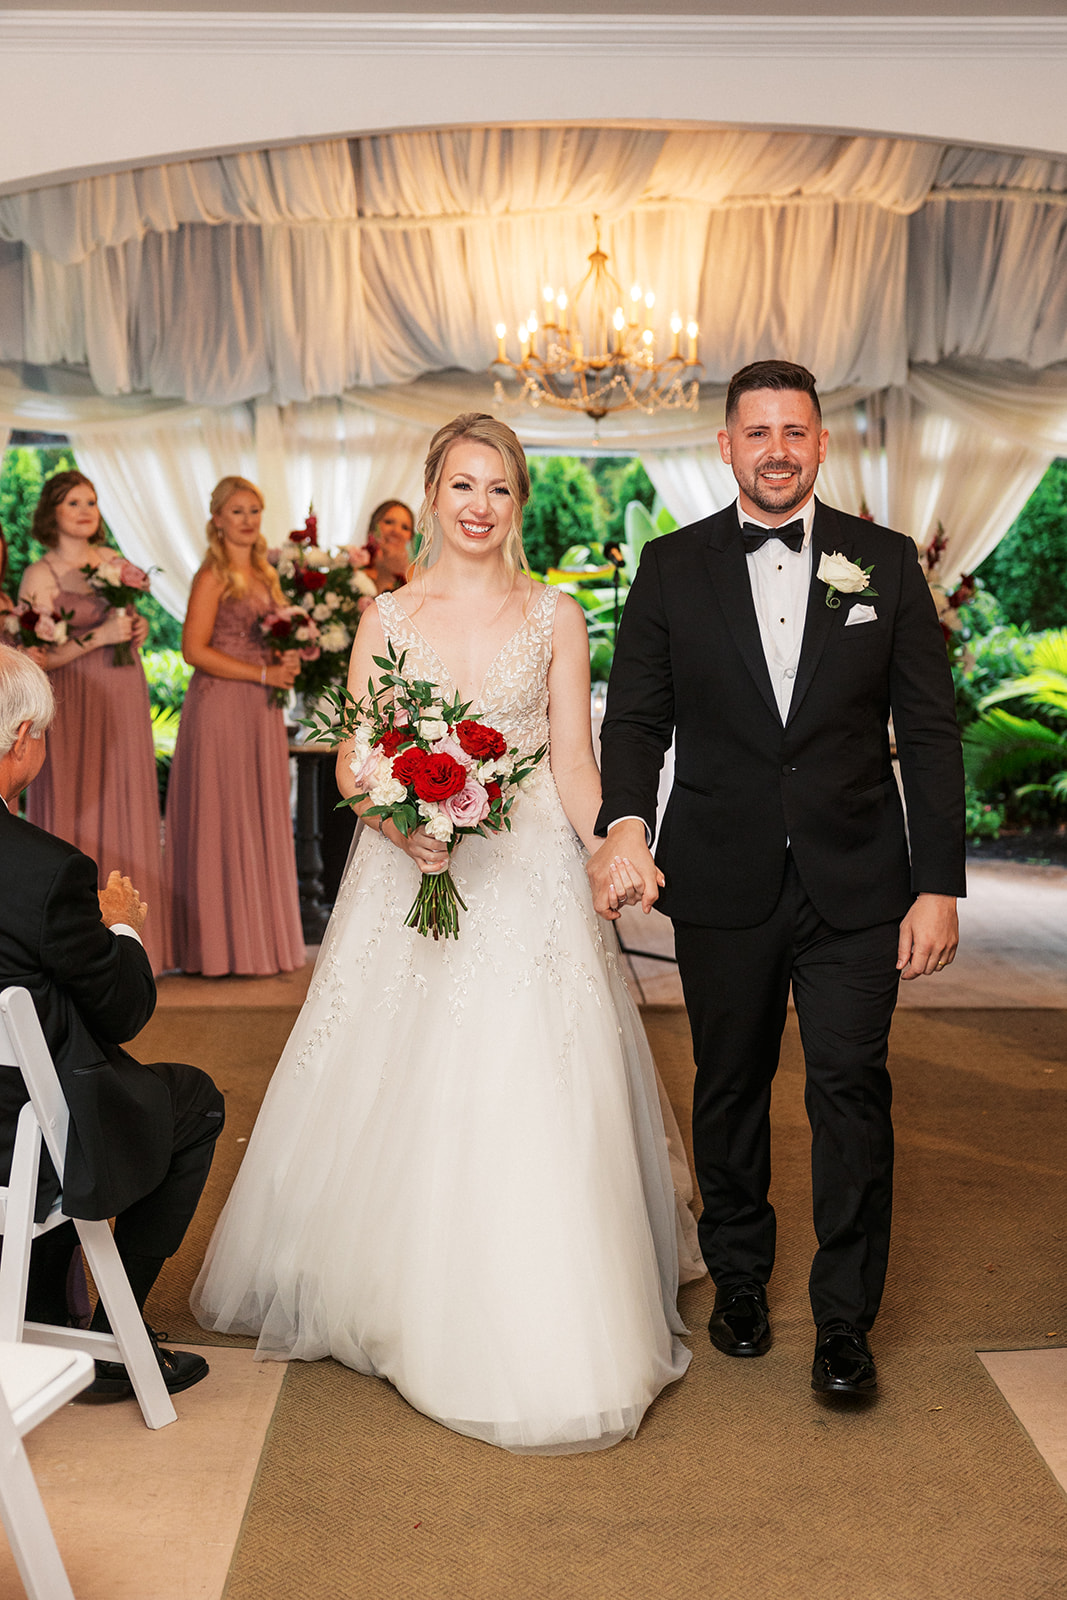 Newlyweds smile while walking back up the aisle after their wedding ceremony